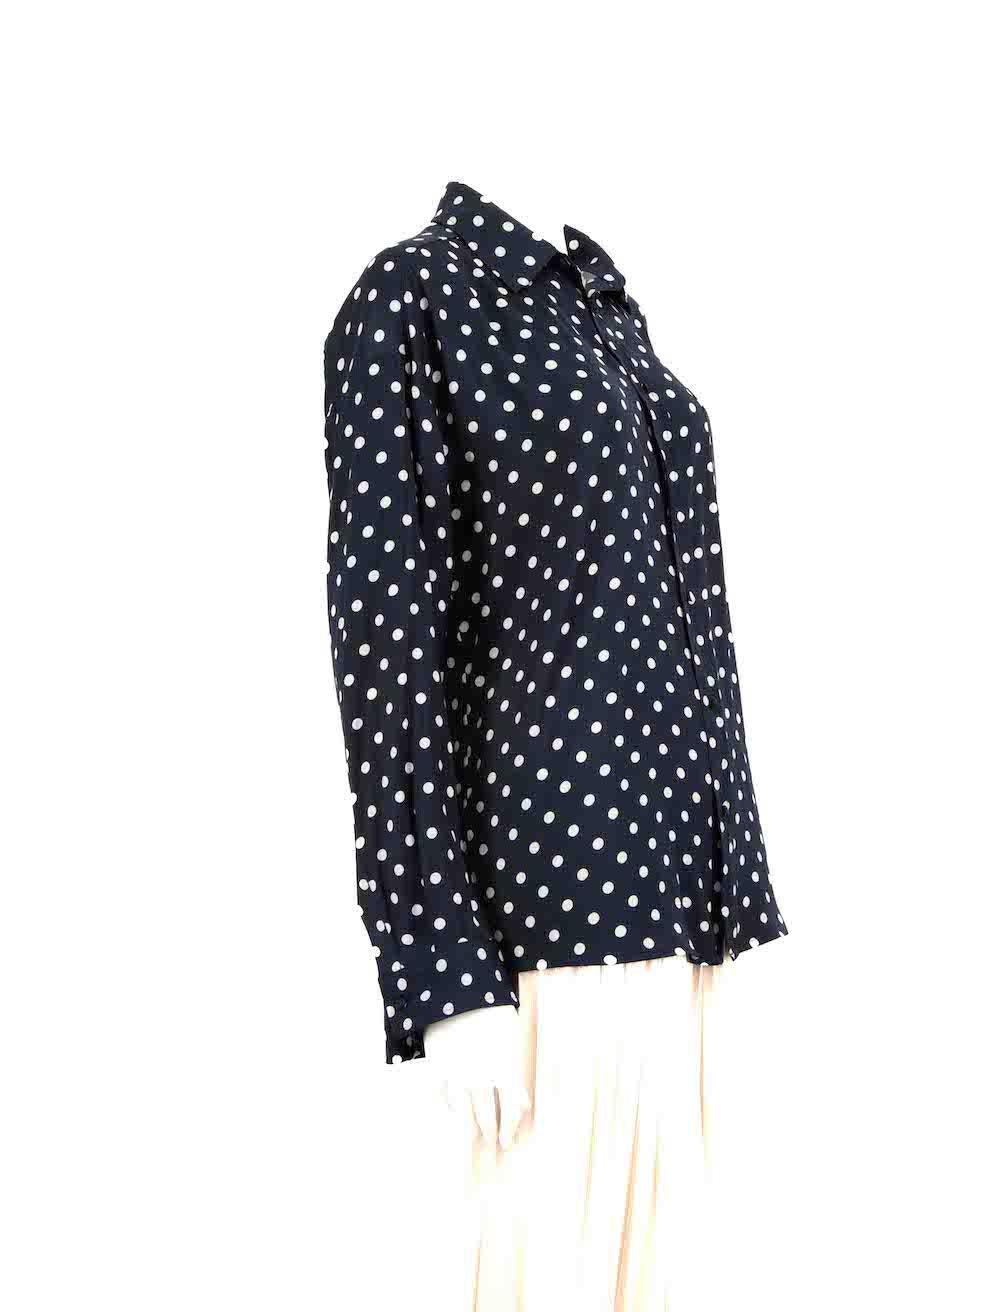 CONDITION is Very good. Hardly any visible wear to shirt is evident on this used Essentiel Antwerp designer resale item.
 
 Details
 Navy
 Polyester
 Shirt
 Polkadot pattern
 Long sleeves
 1x Front angled pocket
 Button up fastening
 Buttoned cuffs
